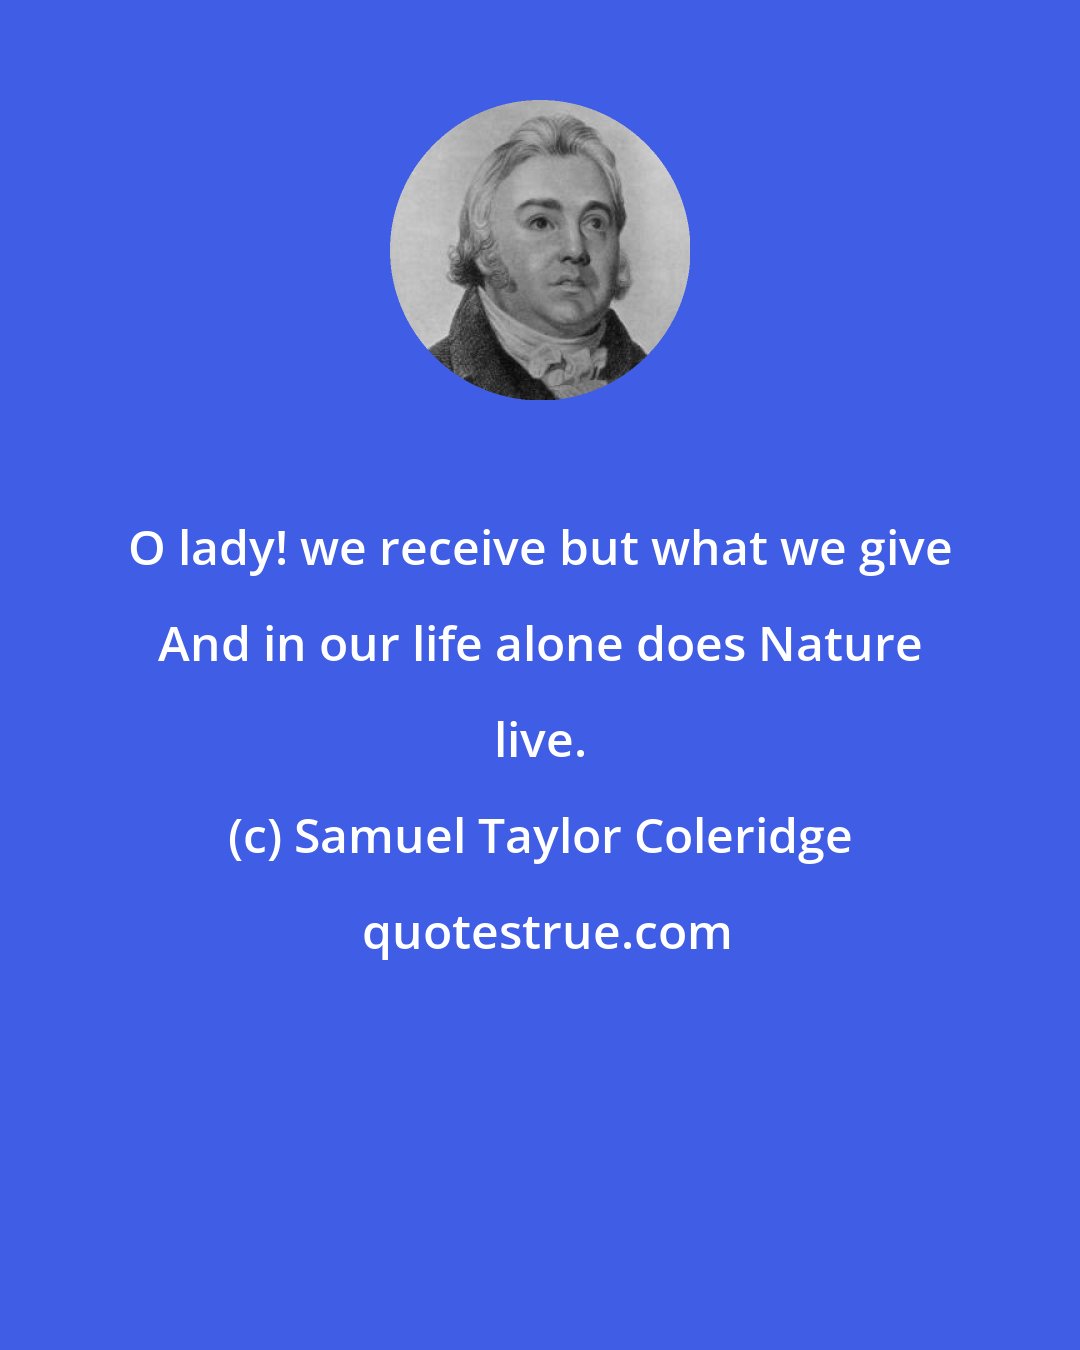 Samuel Taylor Coleridge: O lady! we receive but what we give And in our life alone does Nature live.